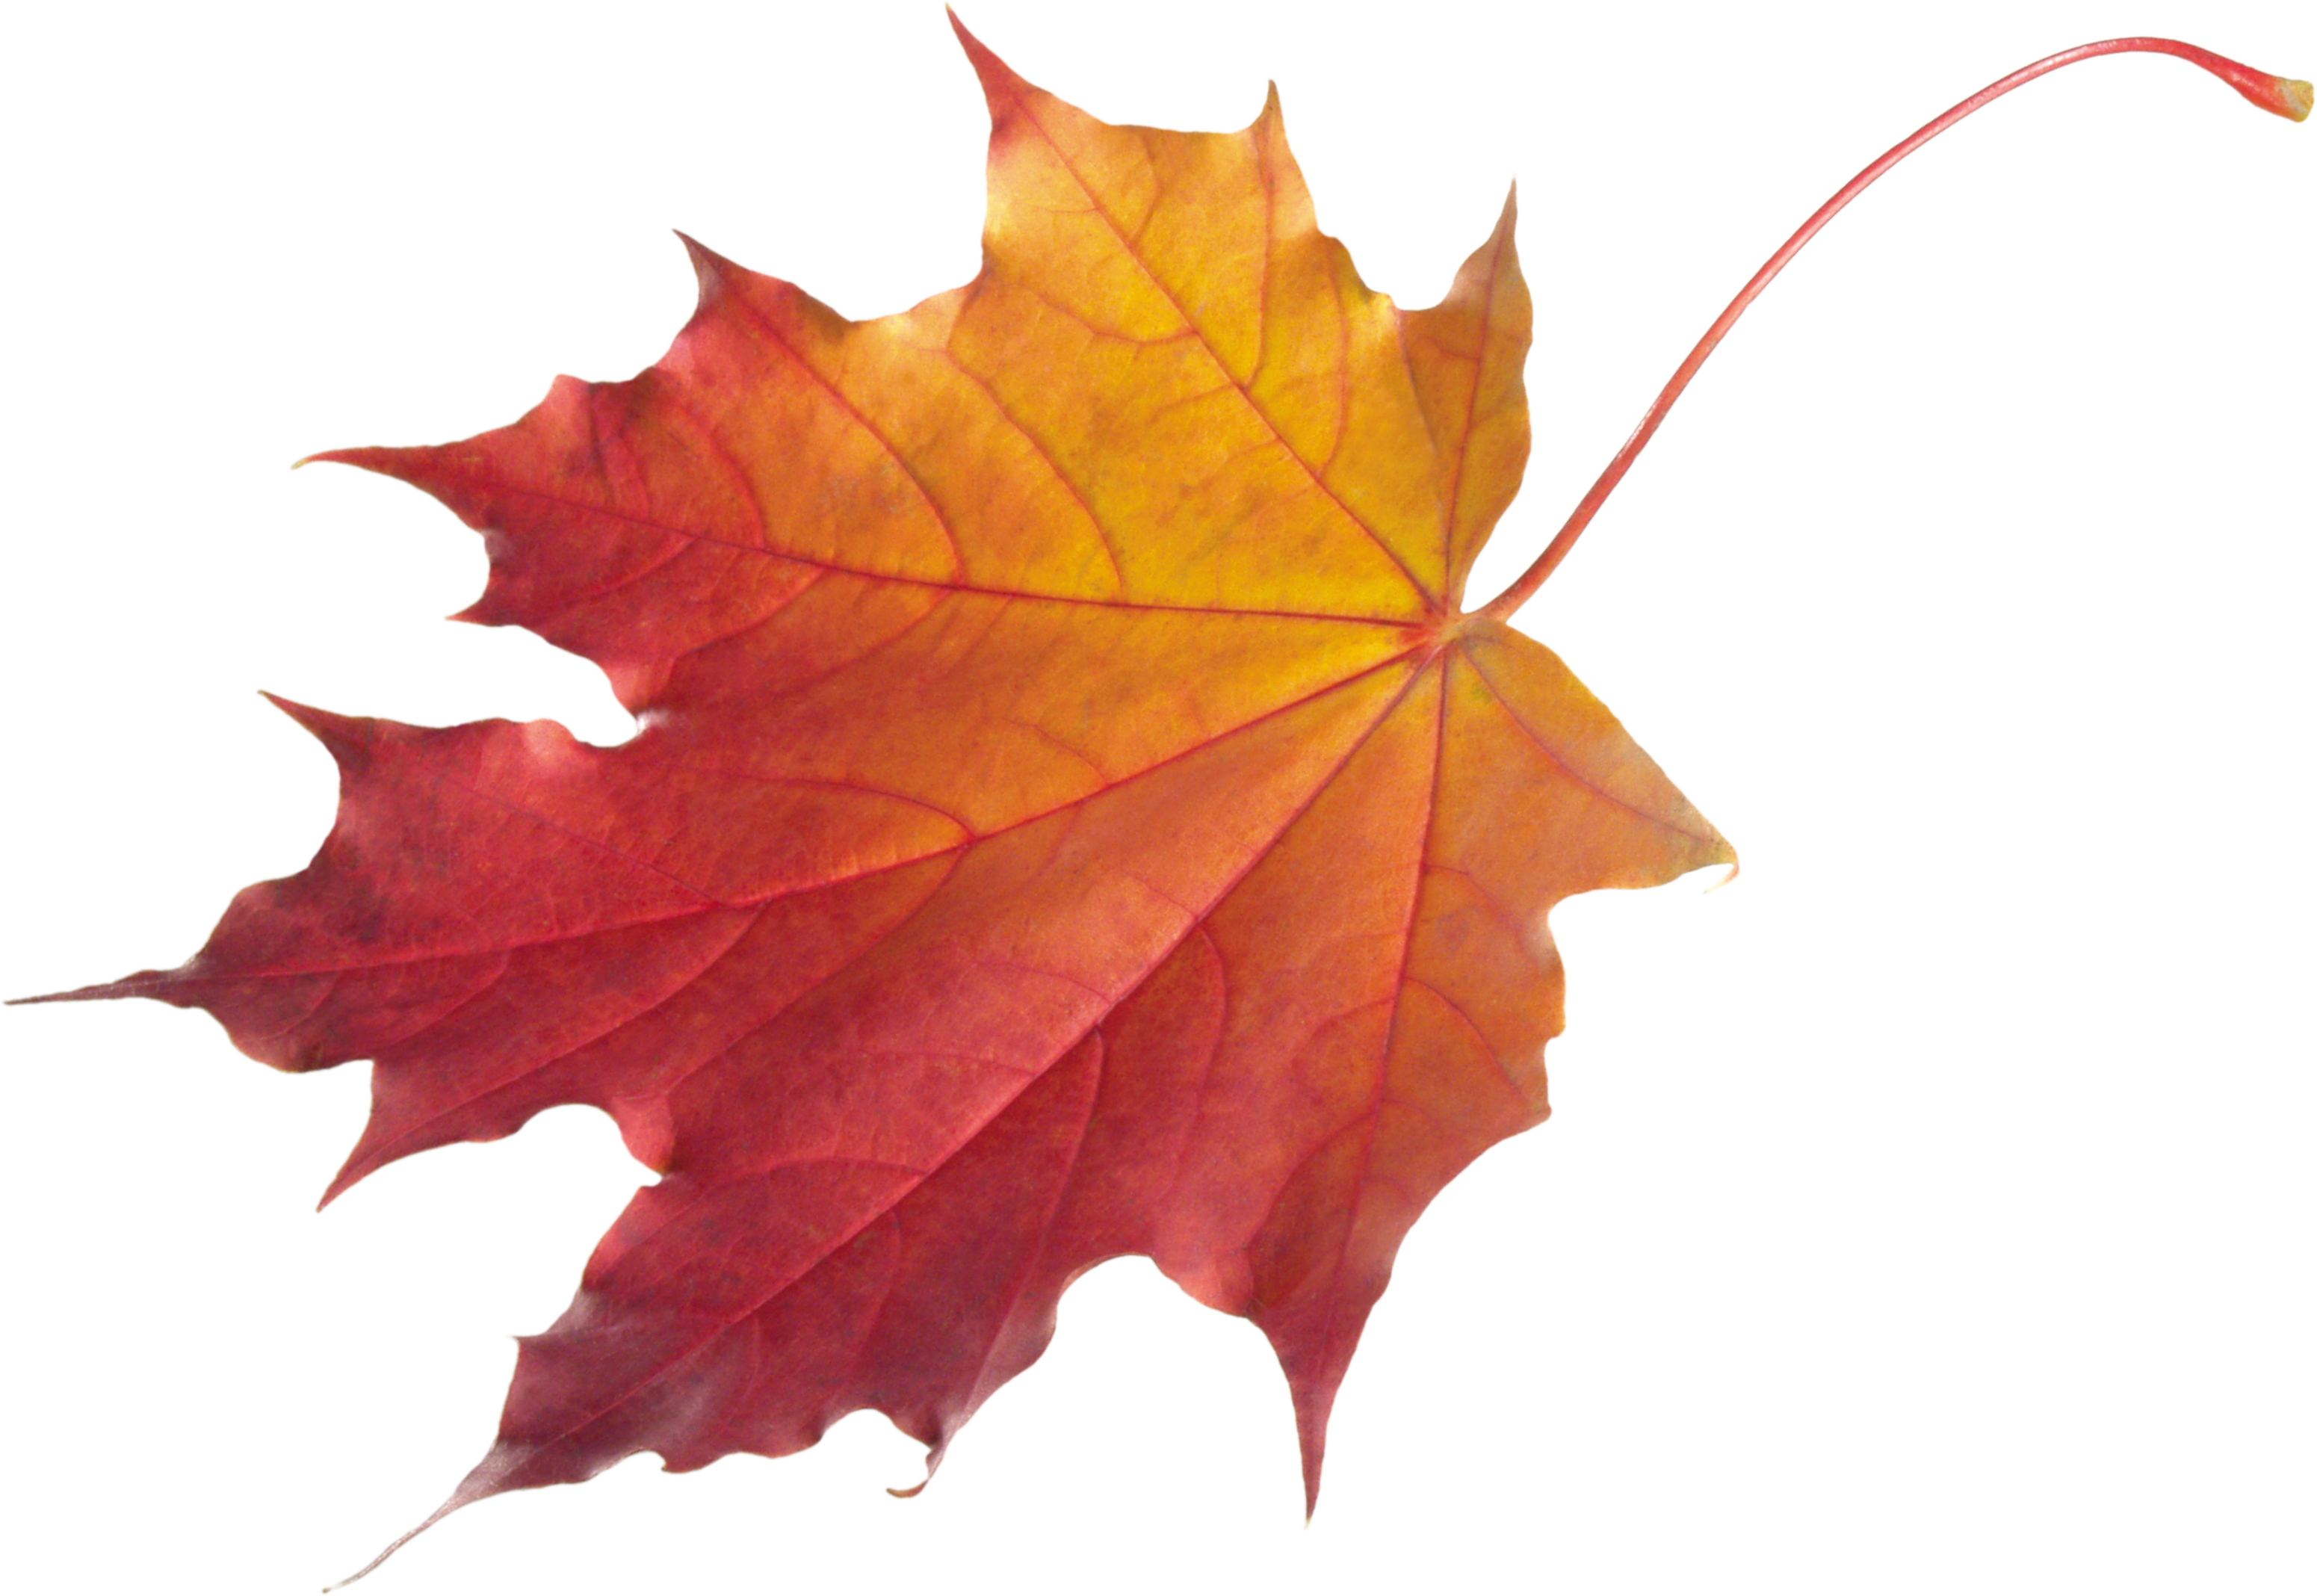 Download Autumn Leaves PNG Image for Free